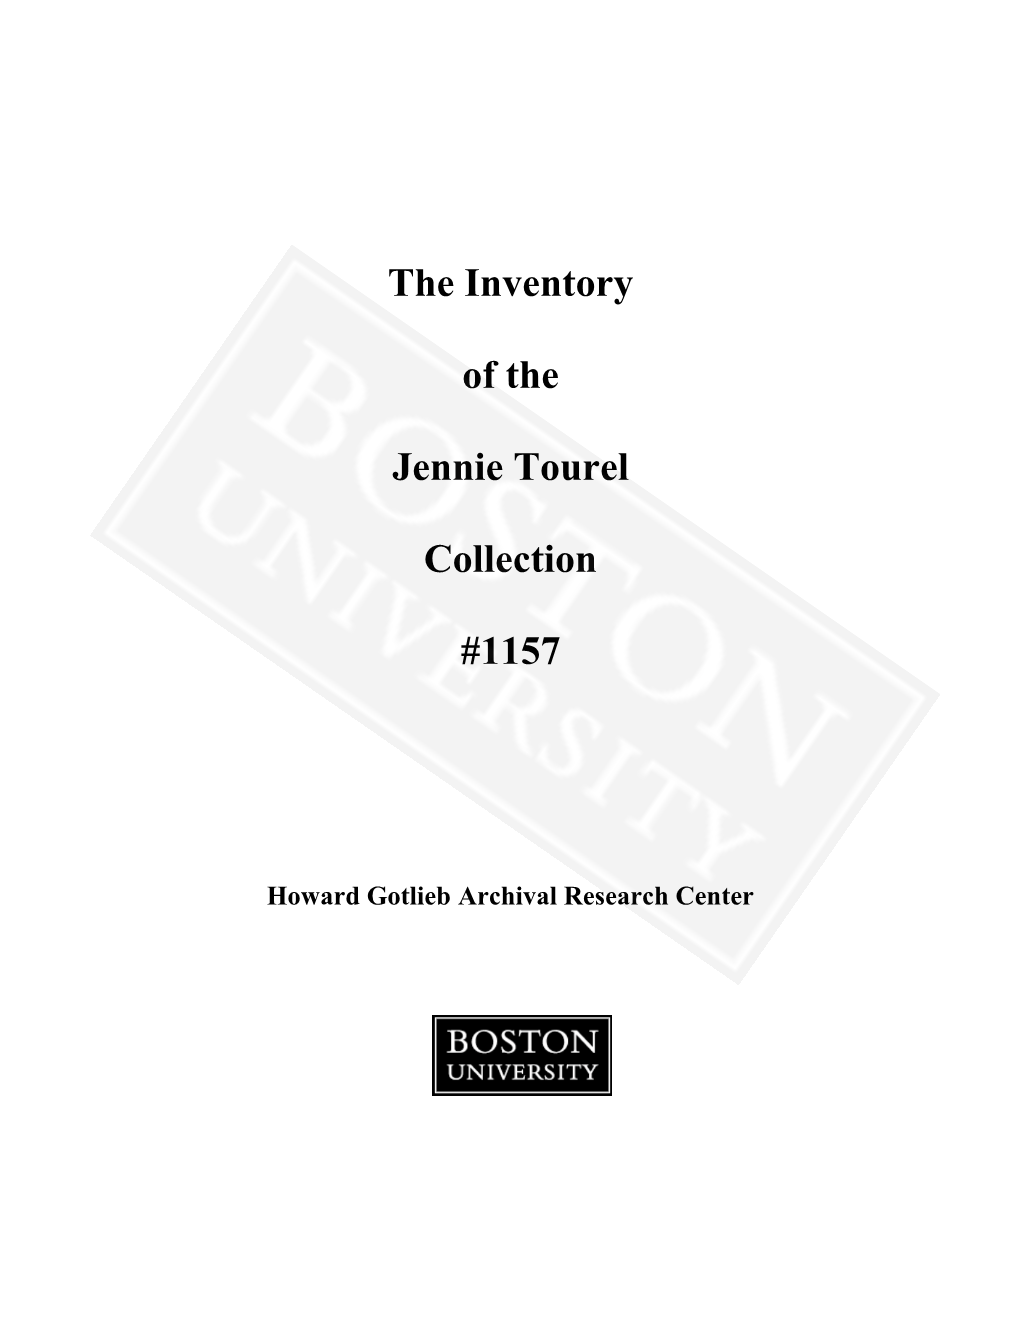 The Inventory of the Jennie Tourel Collection #1157